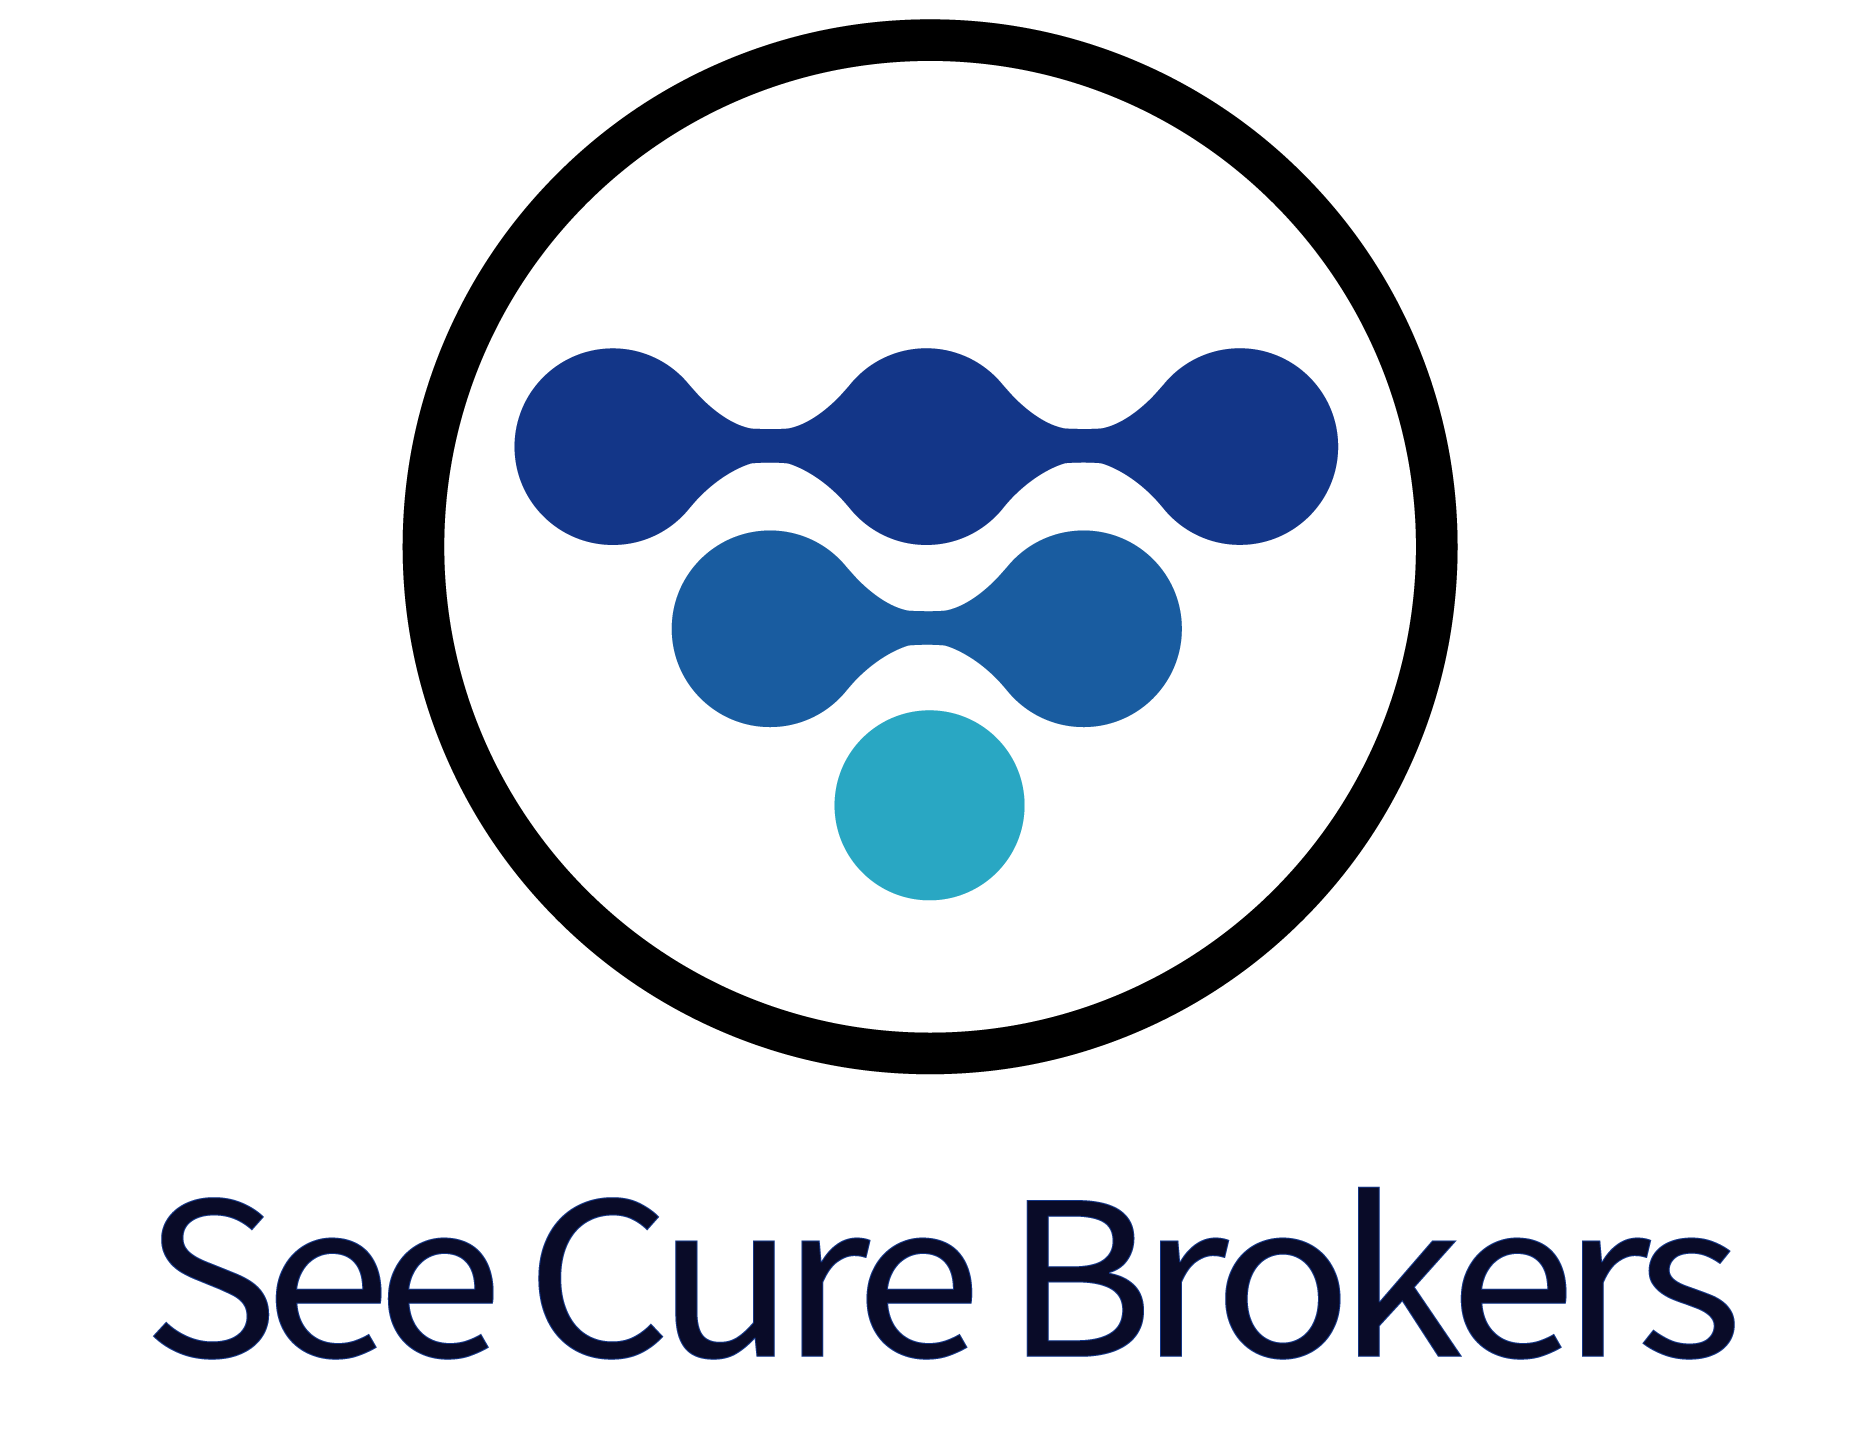 See Cure Brokers